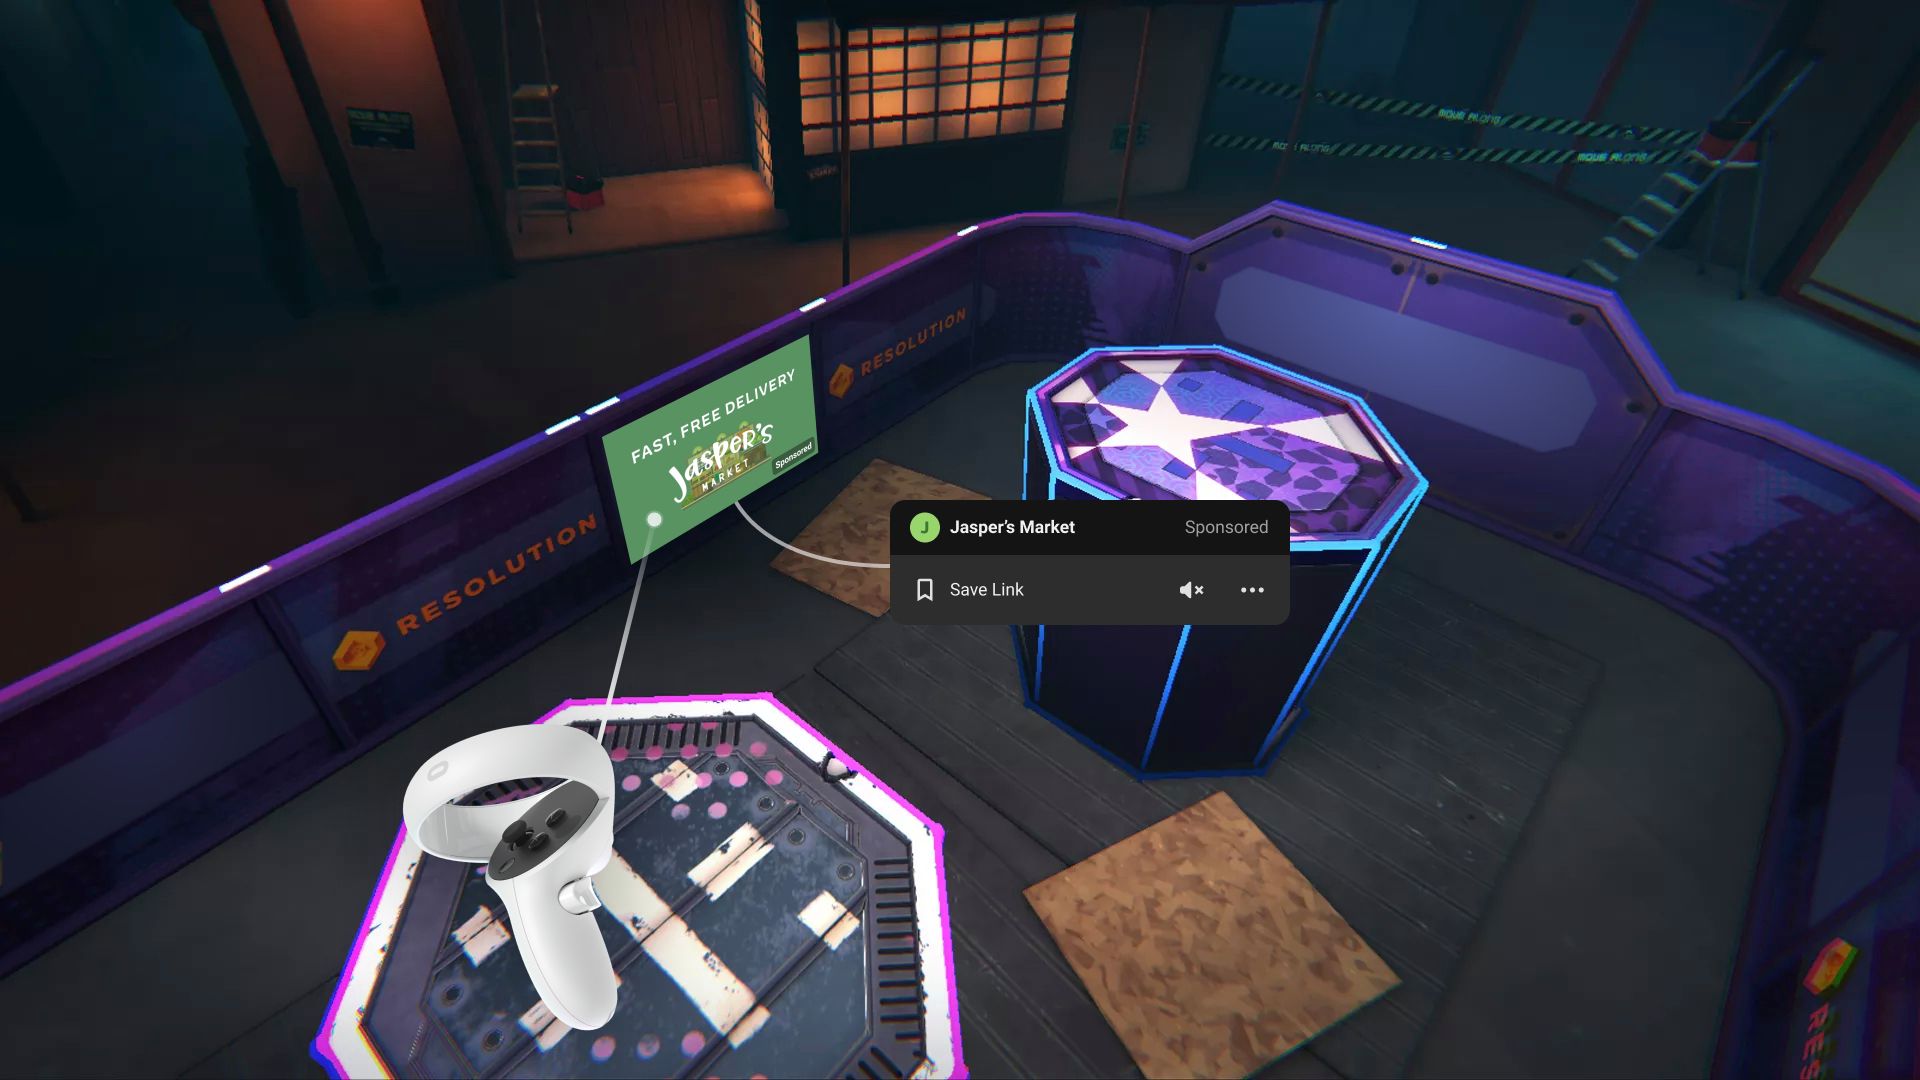 Screenshot of a Facebook VR environment with a green advertising sign